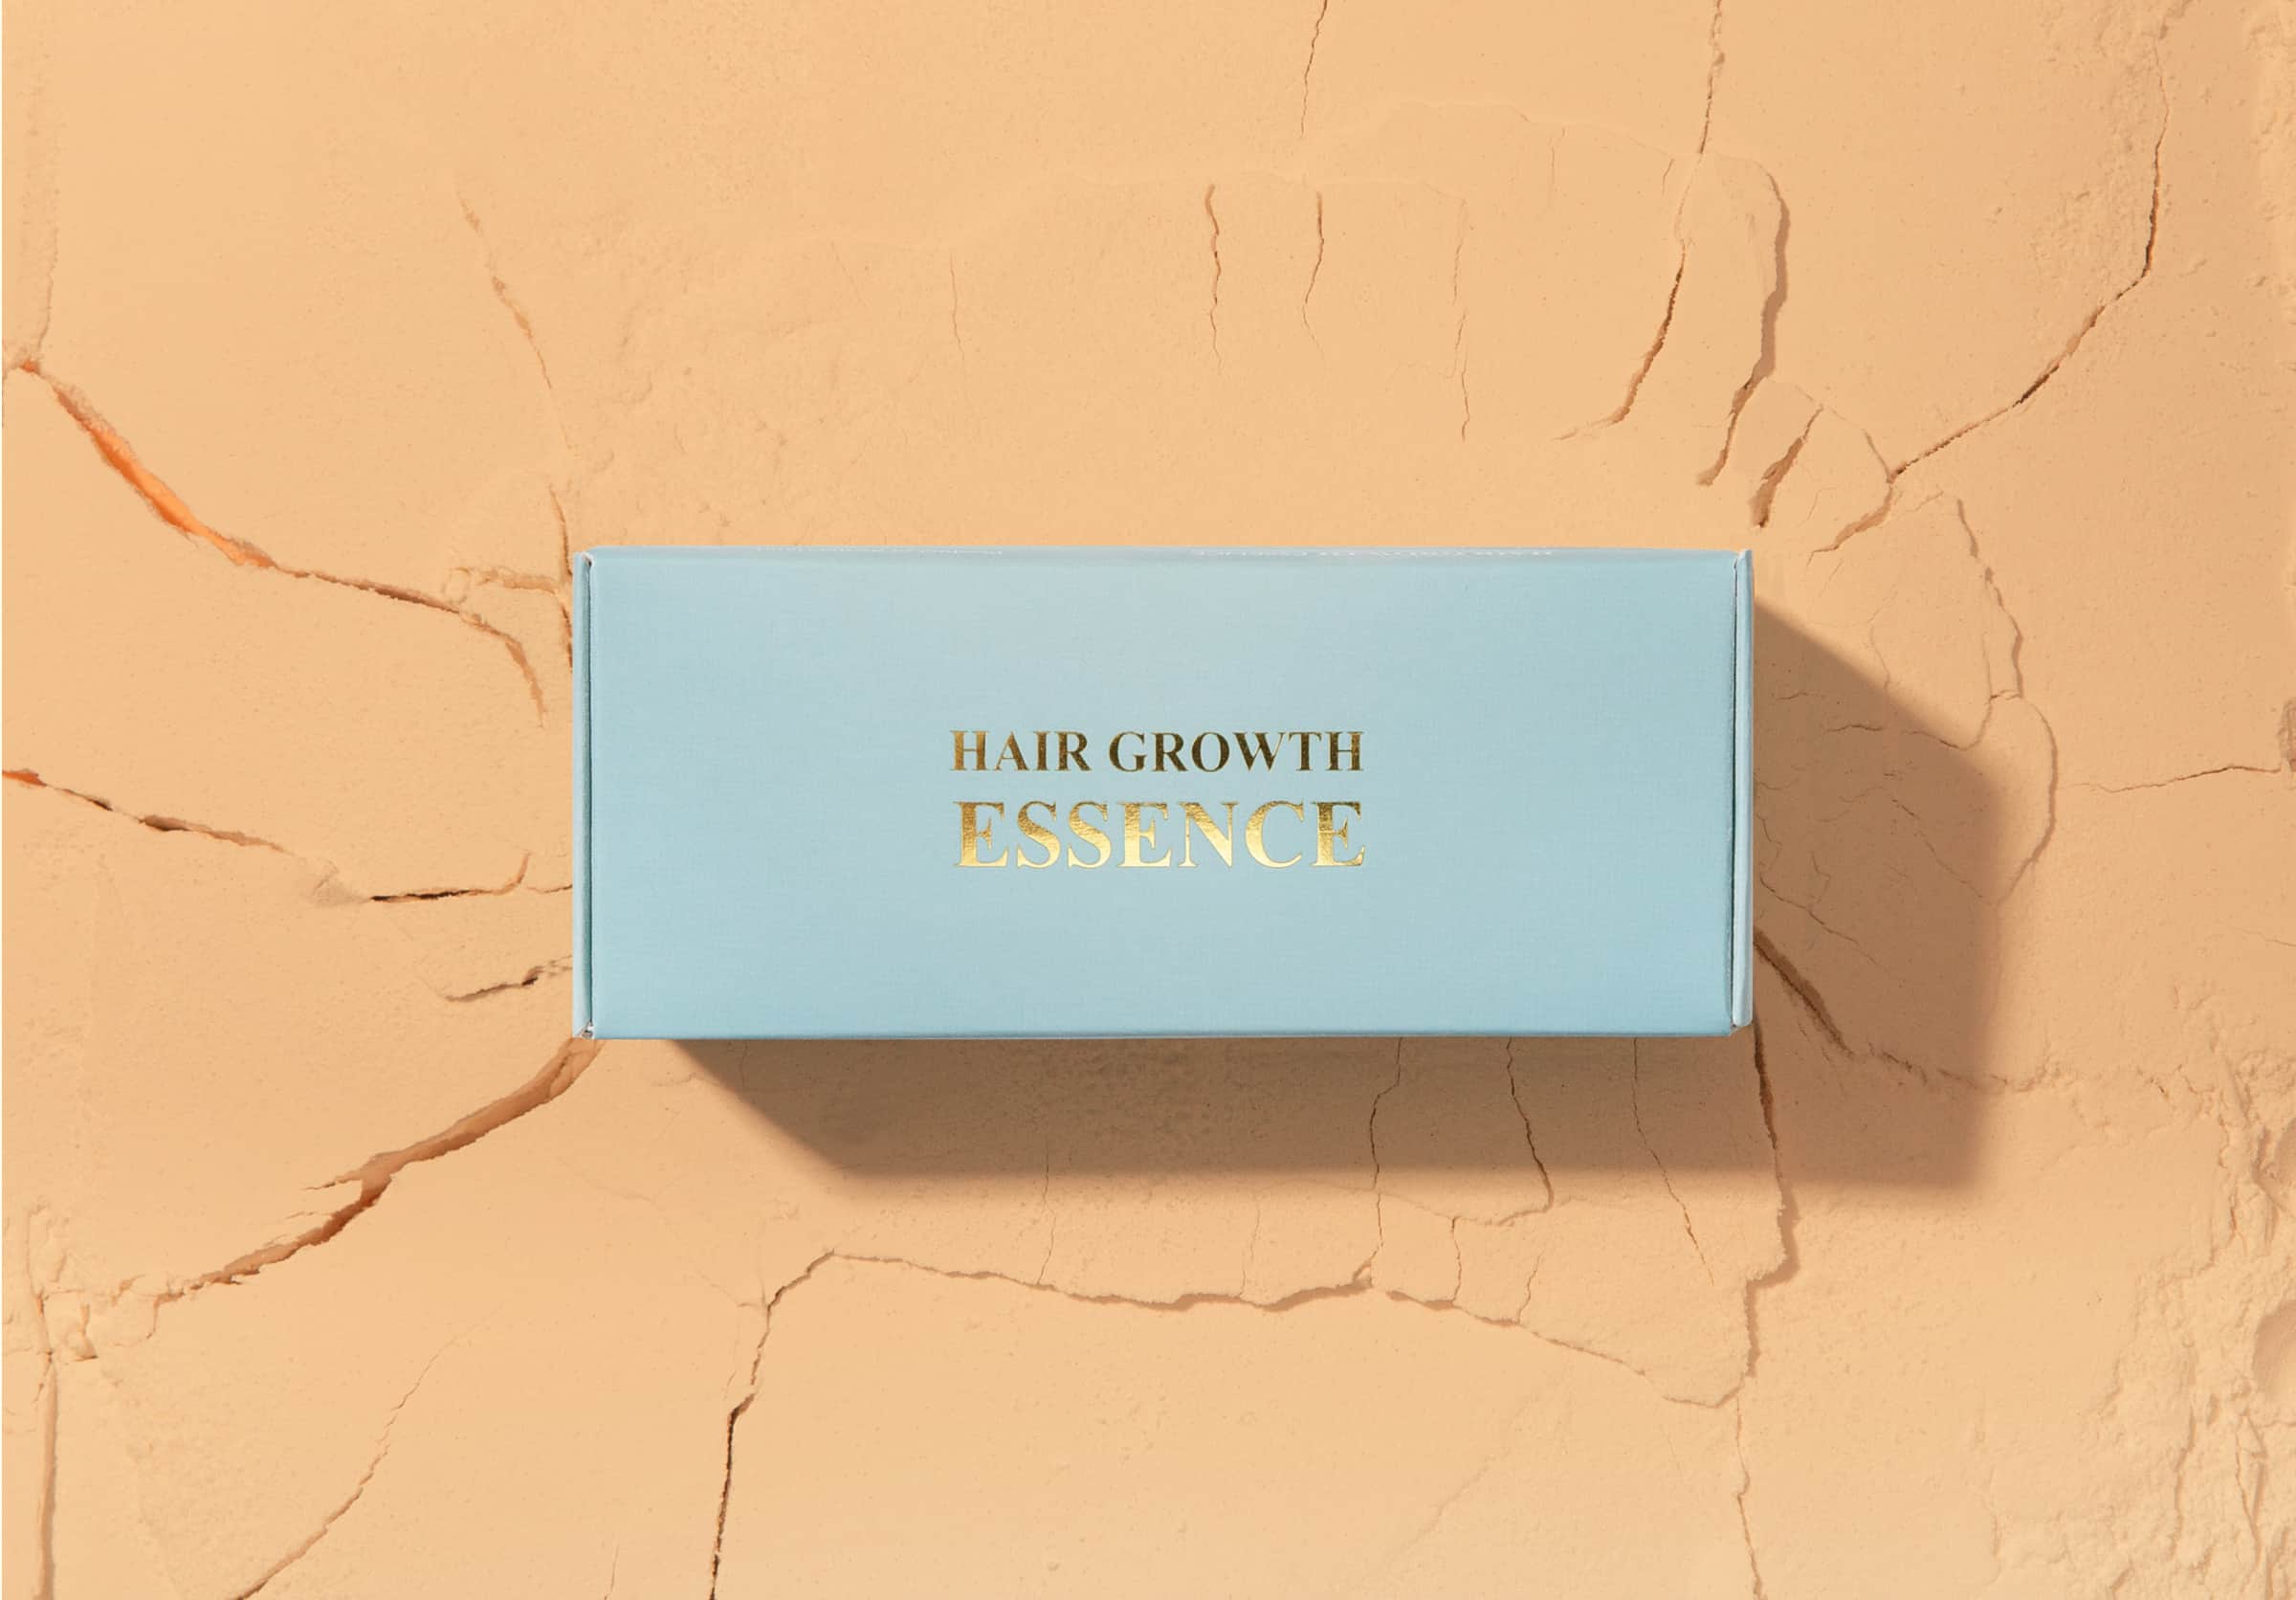 Hair growth serum product box packaging with gold foil stamping.